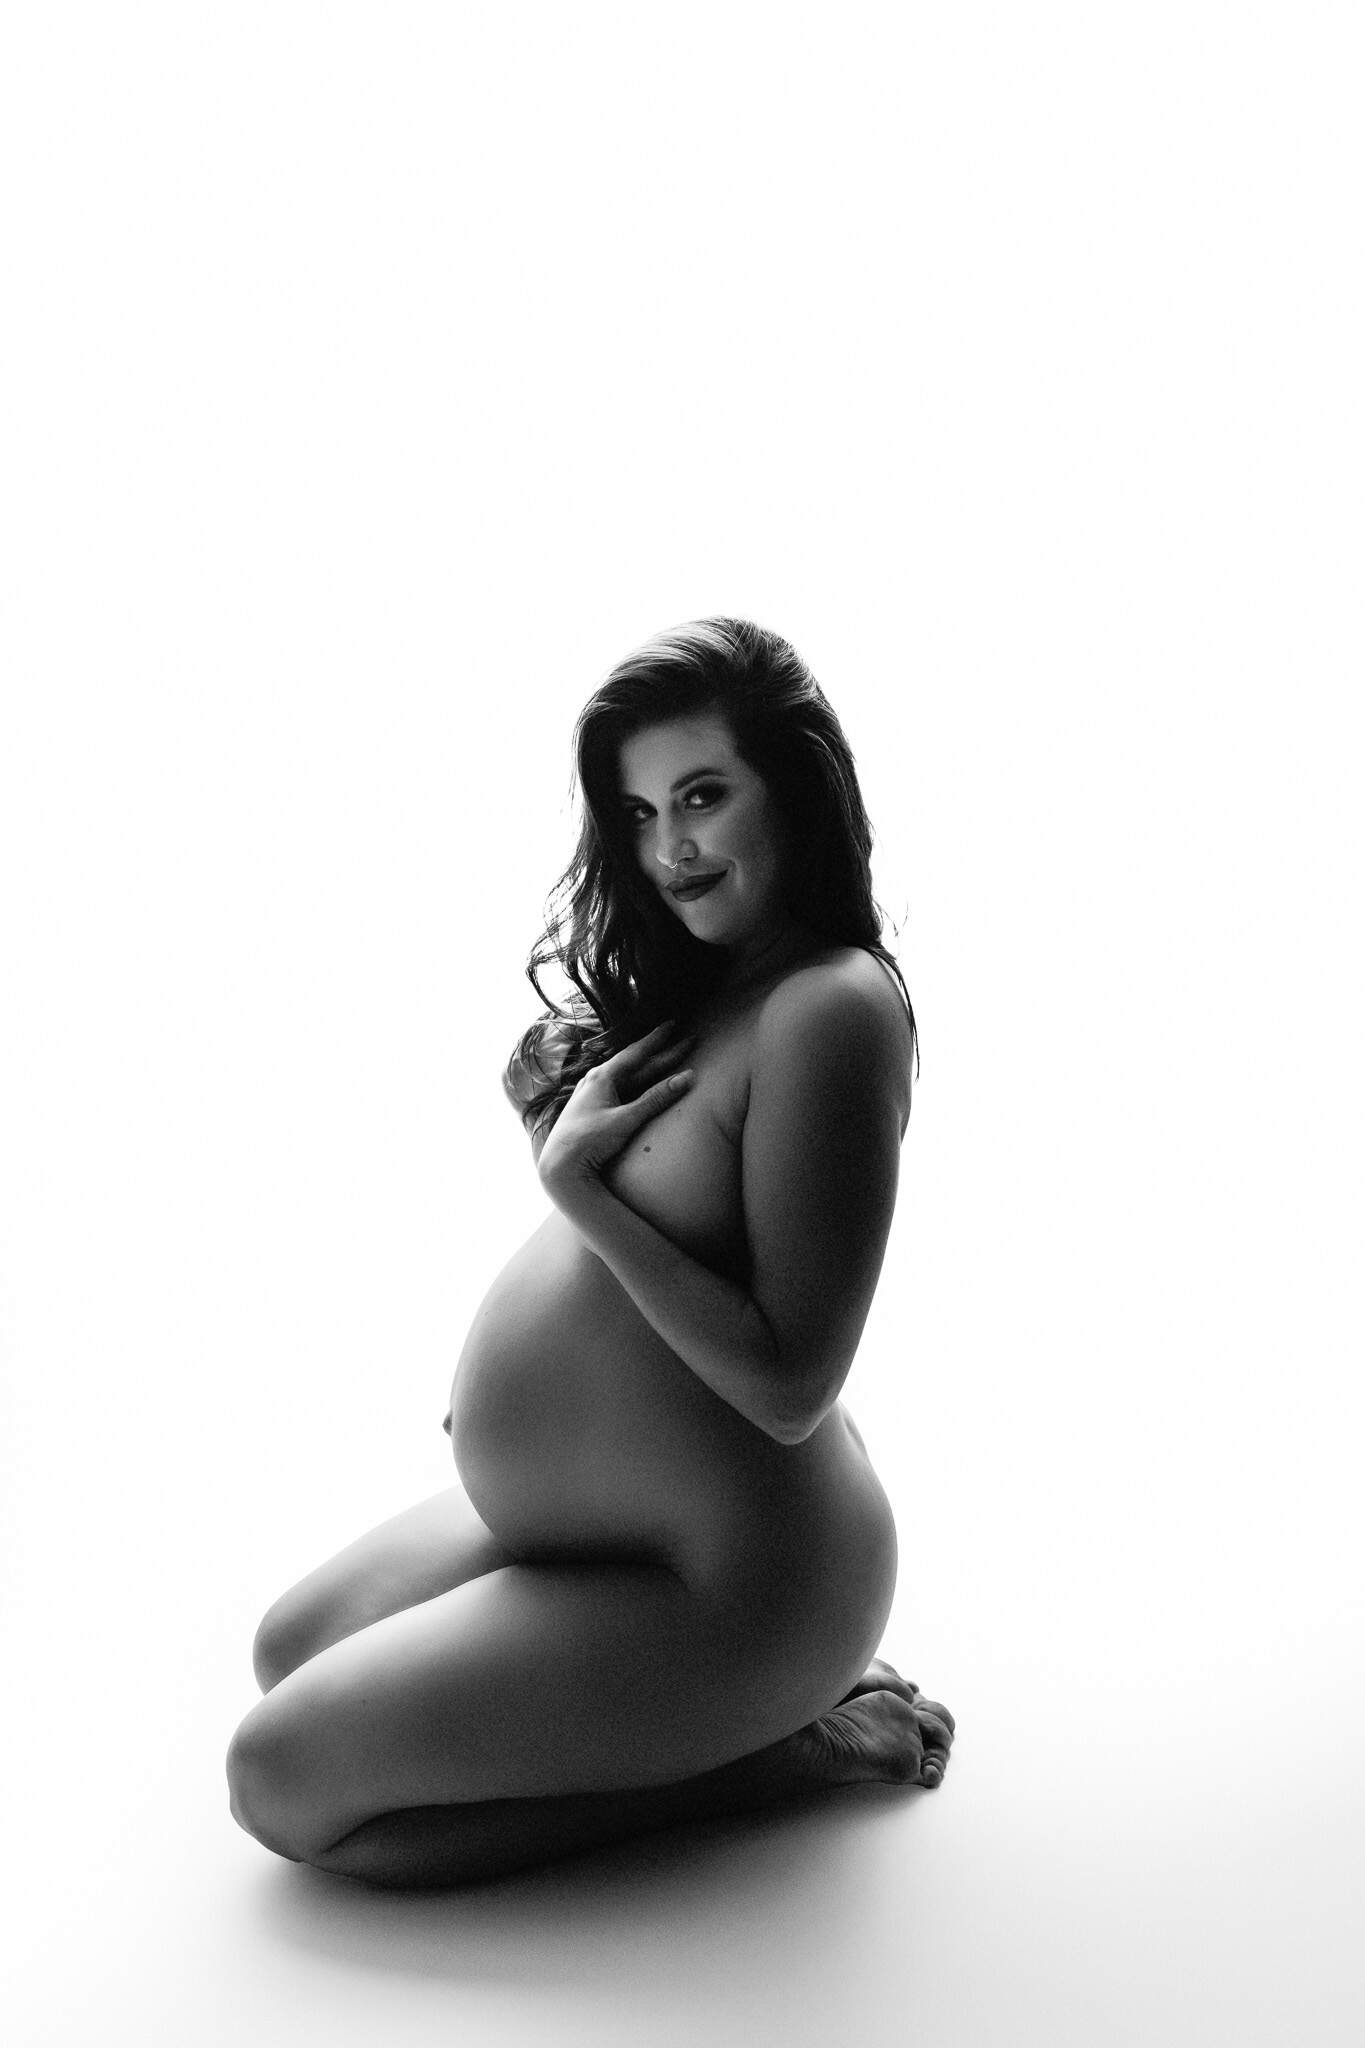 Fine art black and white backlit implied nudity at maternity photoshoot in Pennsylvania.